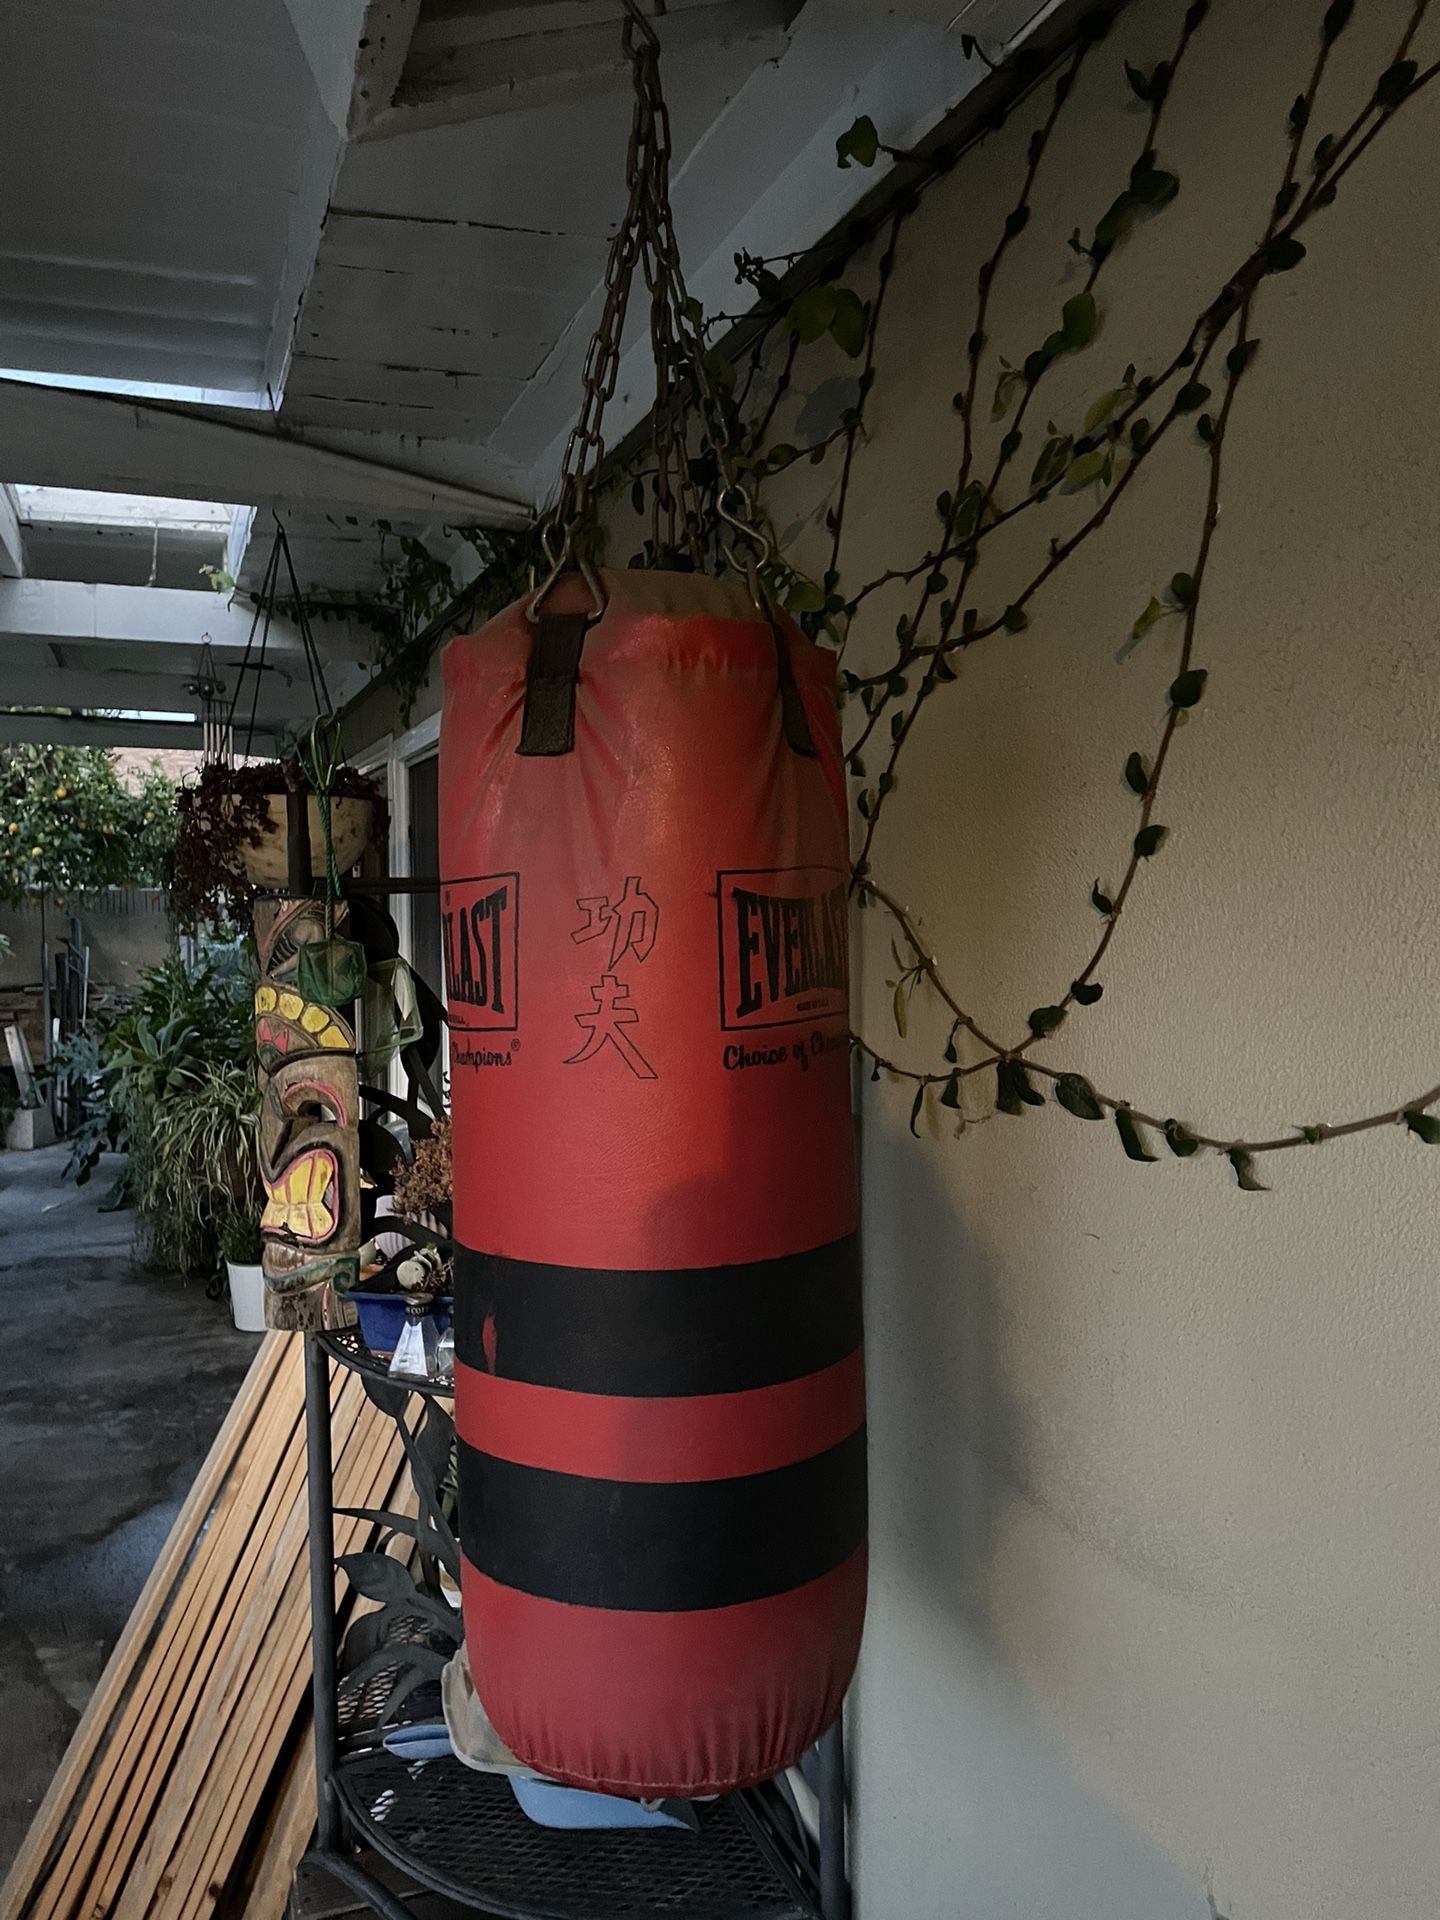 Reactor Edelsteen Jood Everlast 40 Pound Heavy Punching Kicking Bag for Sale in Placentia, CA -  OfferUp